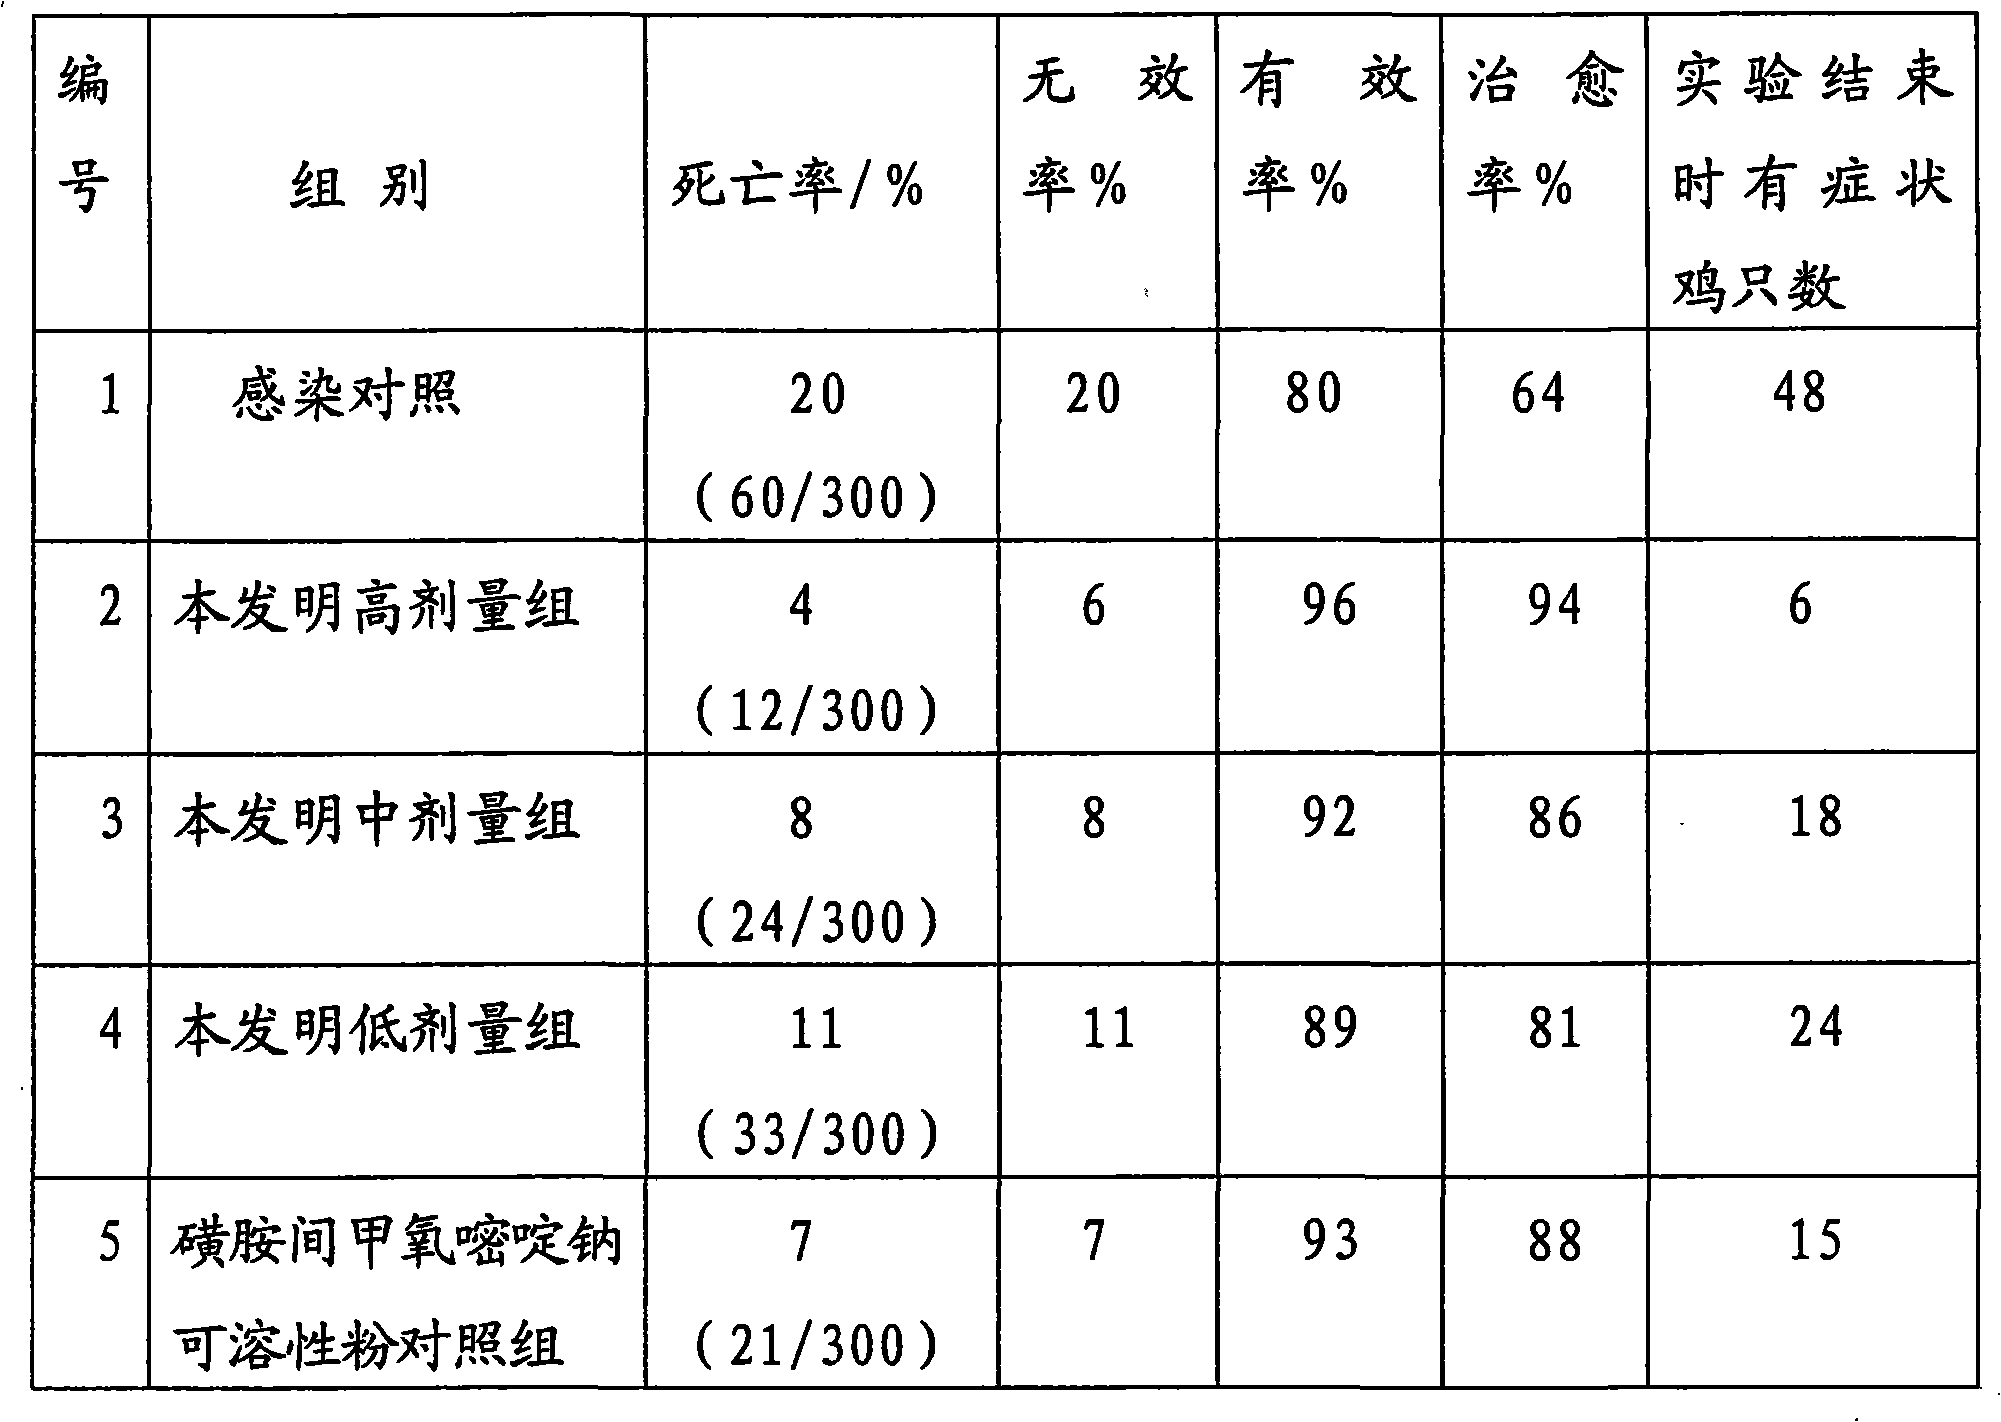 Oral liquid preventing and curing gallinaceous leucocyto zoonosis and preparation method thereof